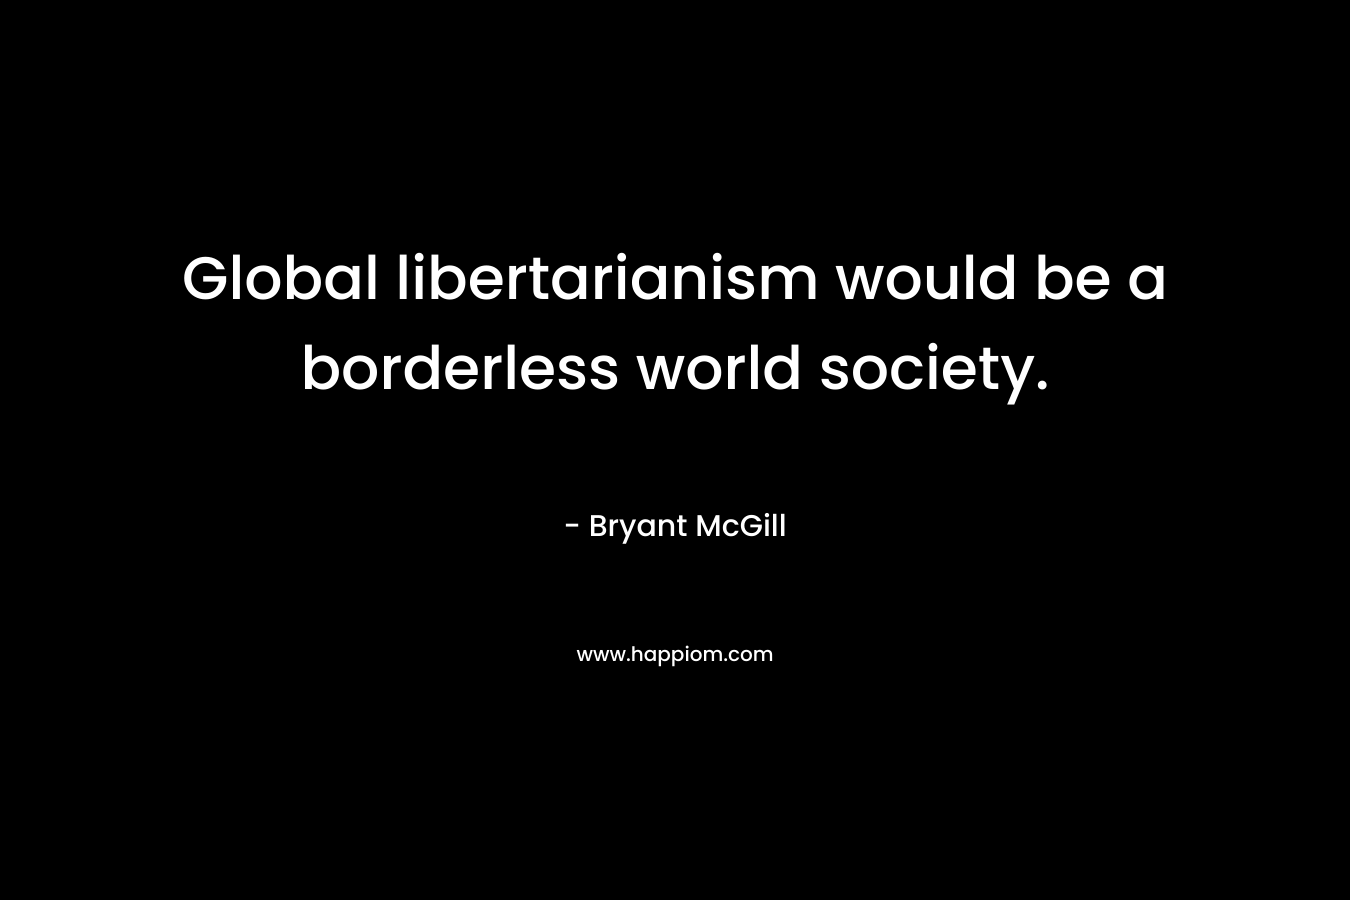 Global libertarianism would be a borderless world society.